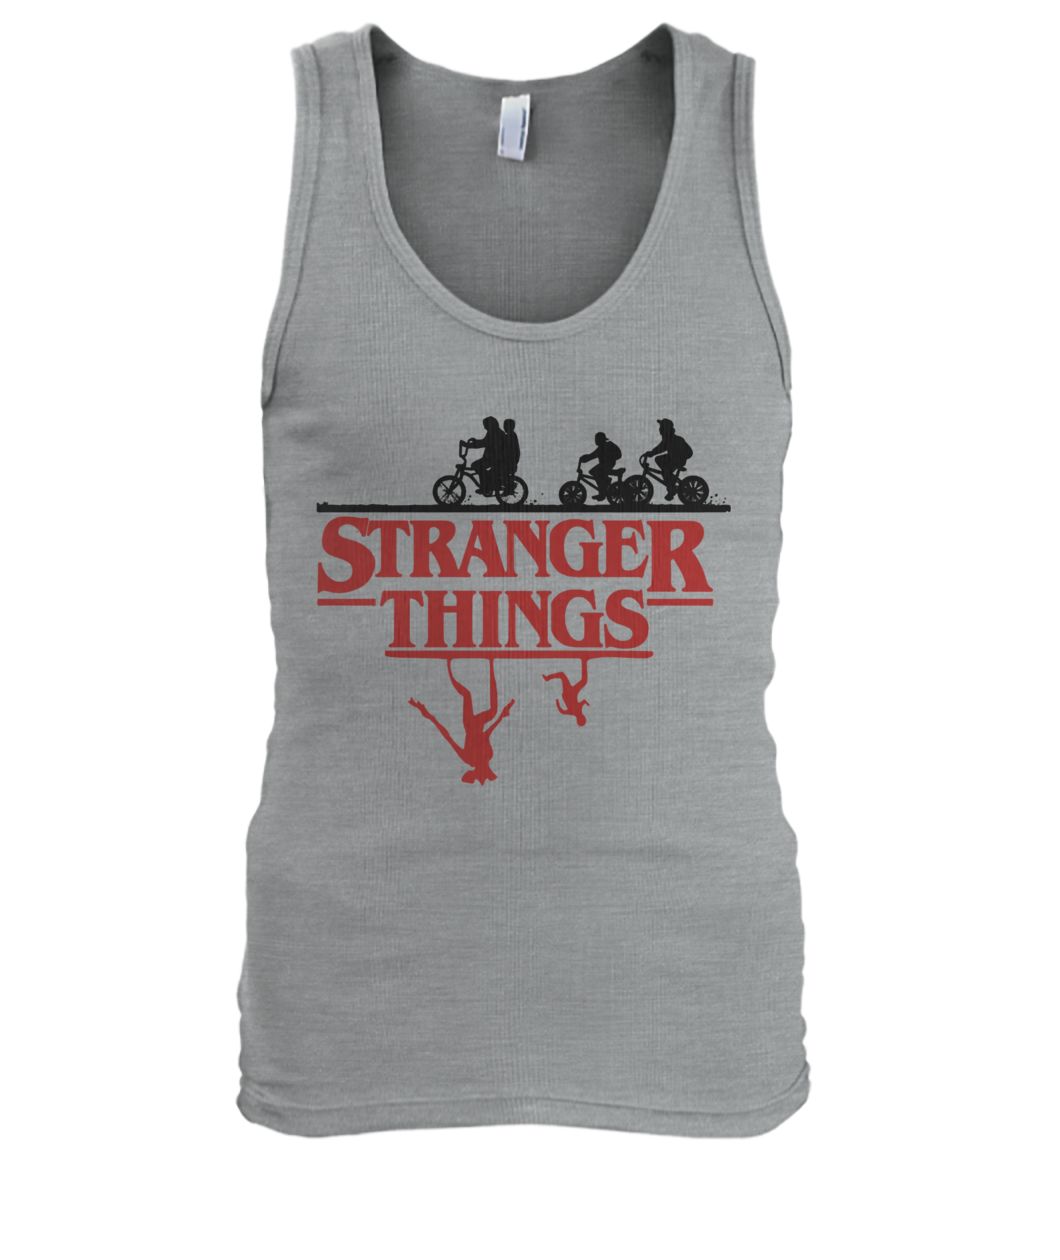 Stranger things in the woods stuck in the upside down men's tank top